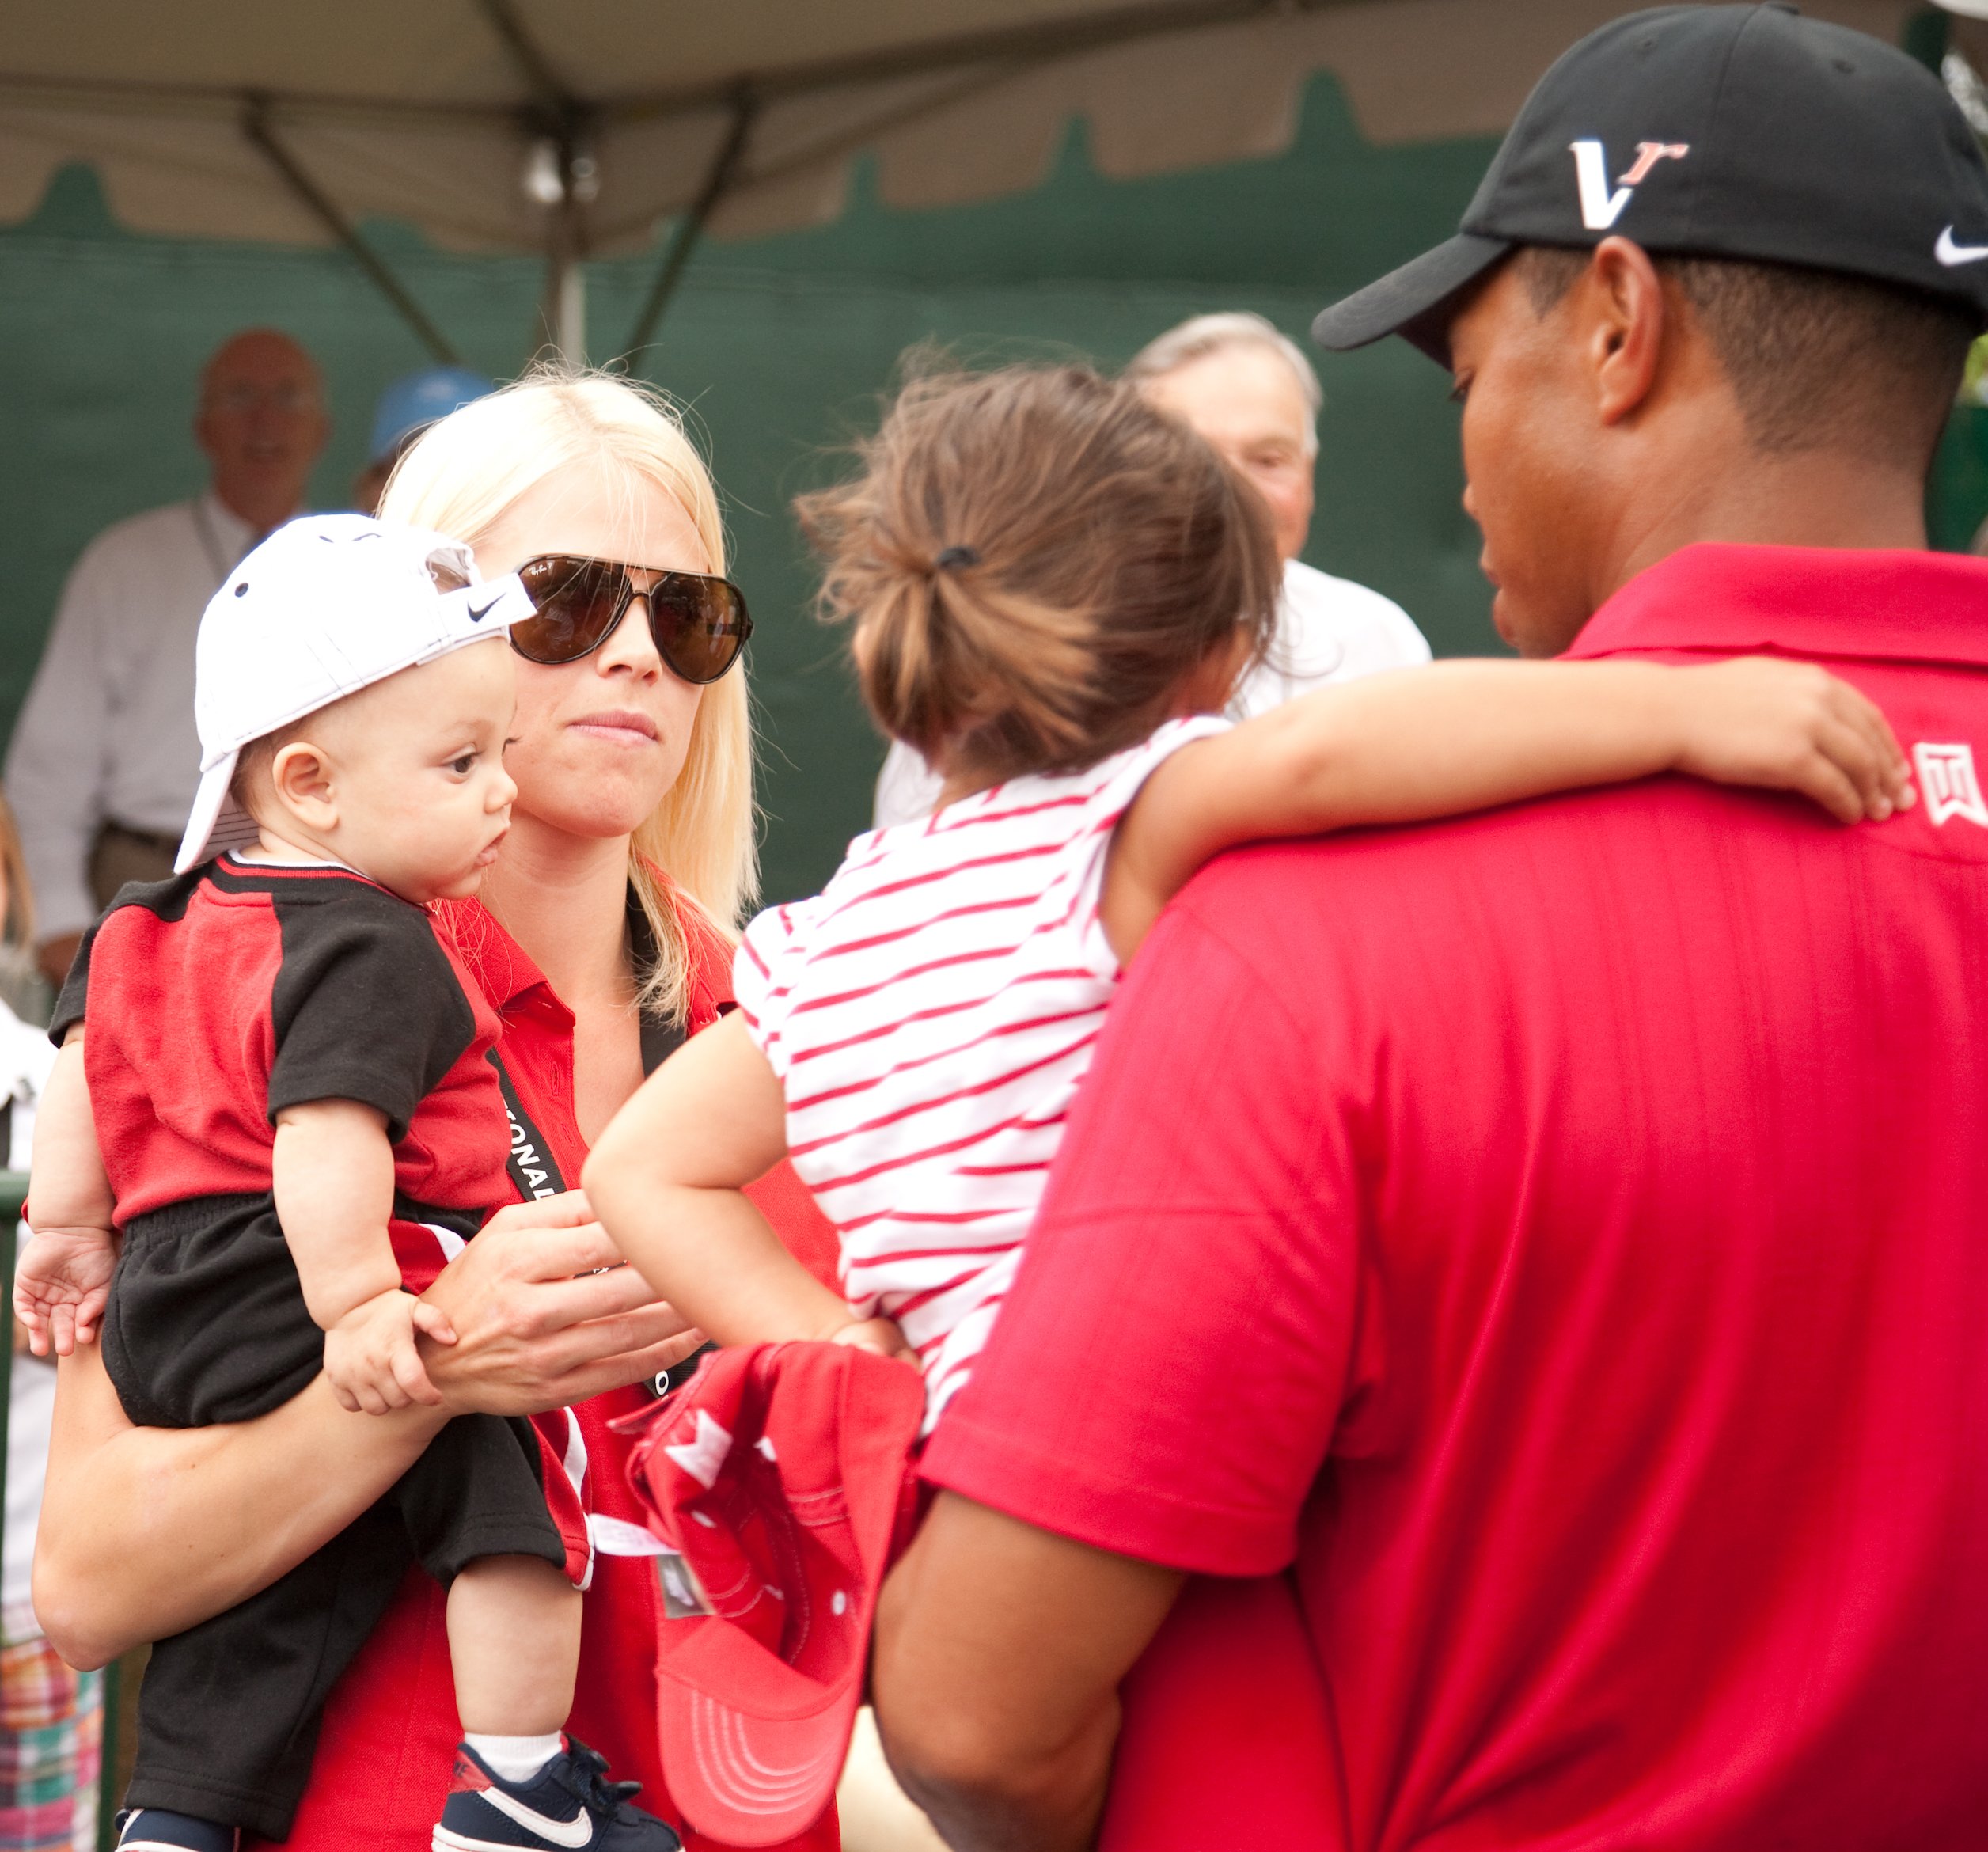 Tiger Woods is greeted by his son Charlie Woods, wife Elin Woods and daughter Sam Woods after the final round of the 2009 AT&T National hosted by Tiger Woods, held at Congressional Country Club on July 5, 2009 in Bethesda, Maryland. | Source: Getty Images